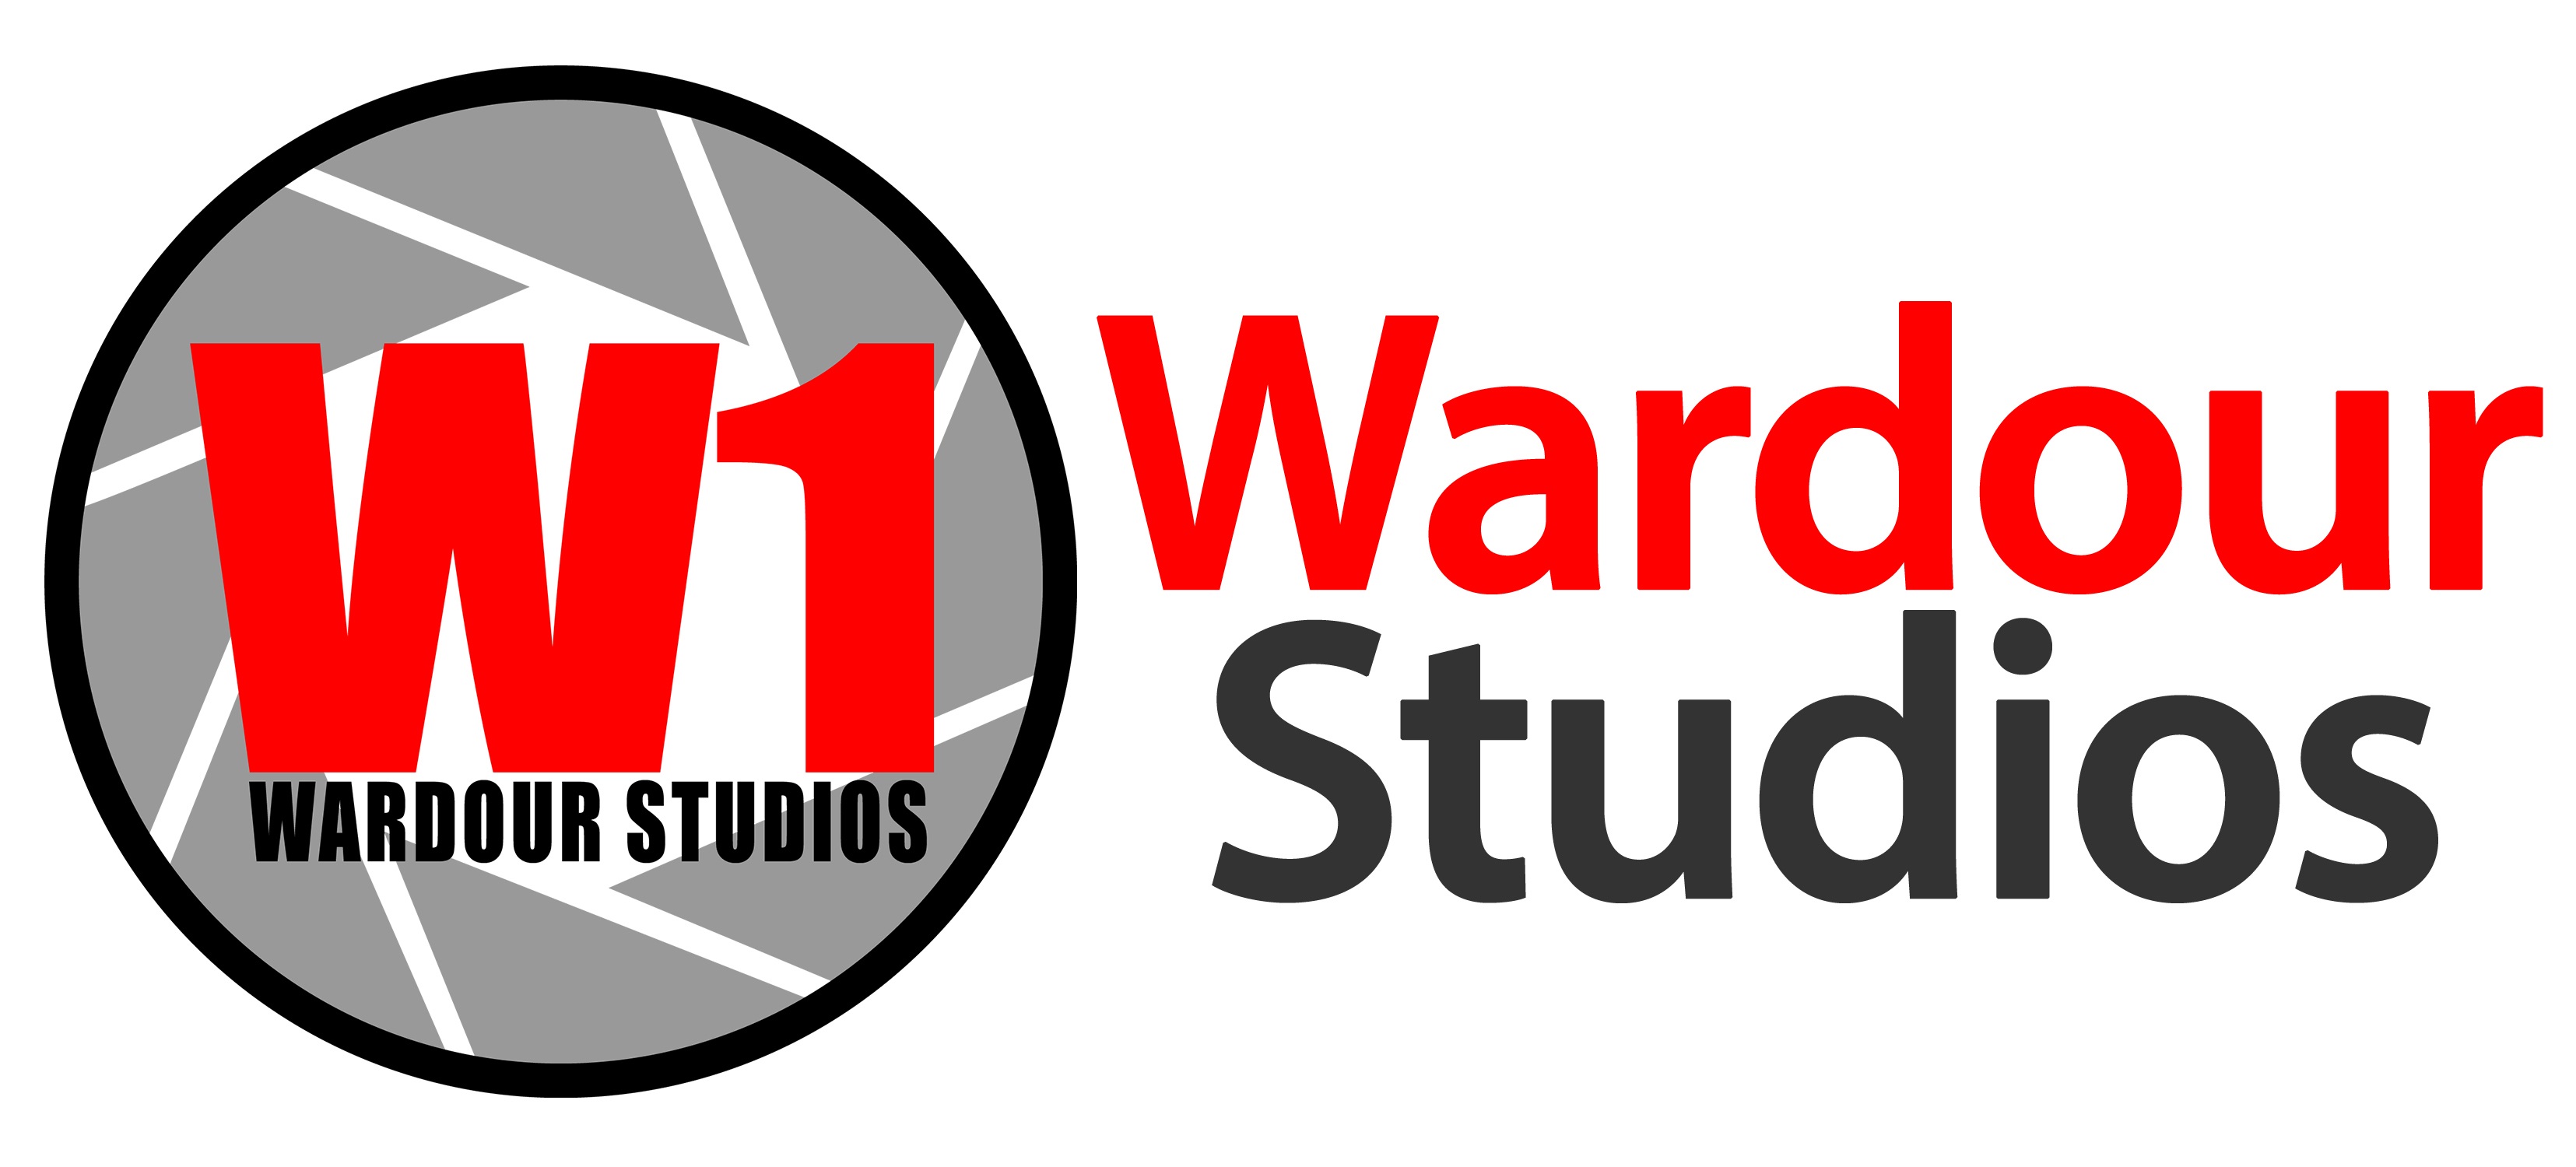 Wardour Studios is a state of the art, next generation, film studio, with solid artistic and advanced technology foundation.